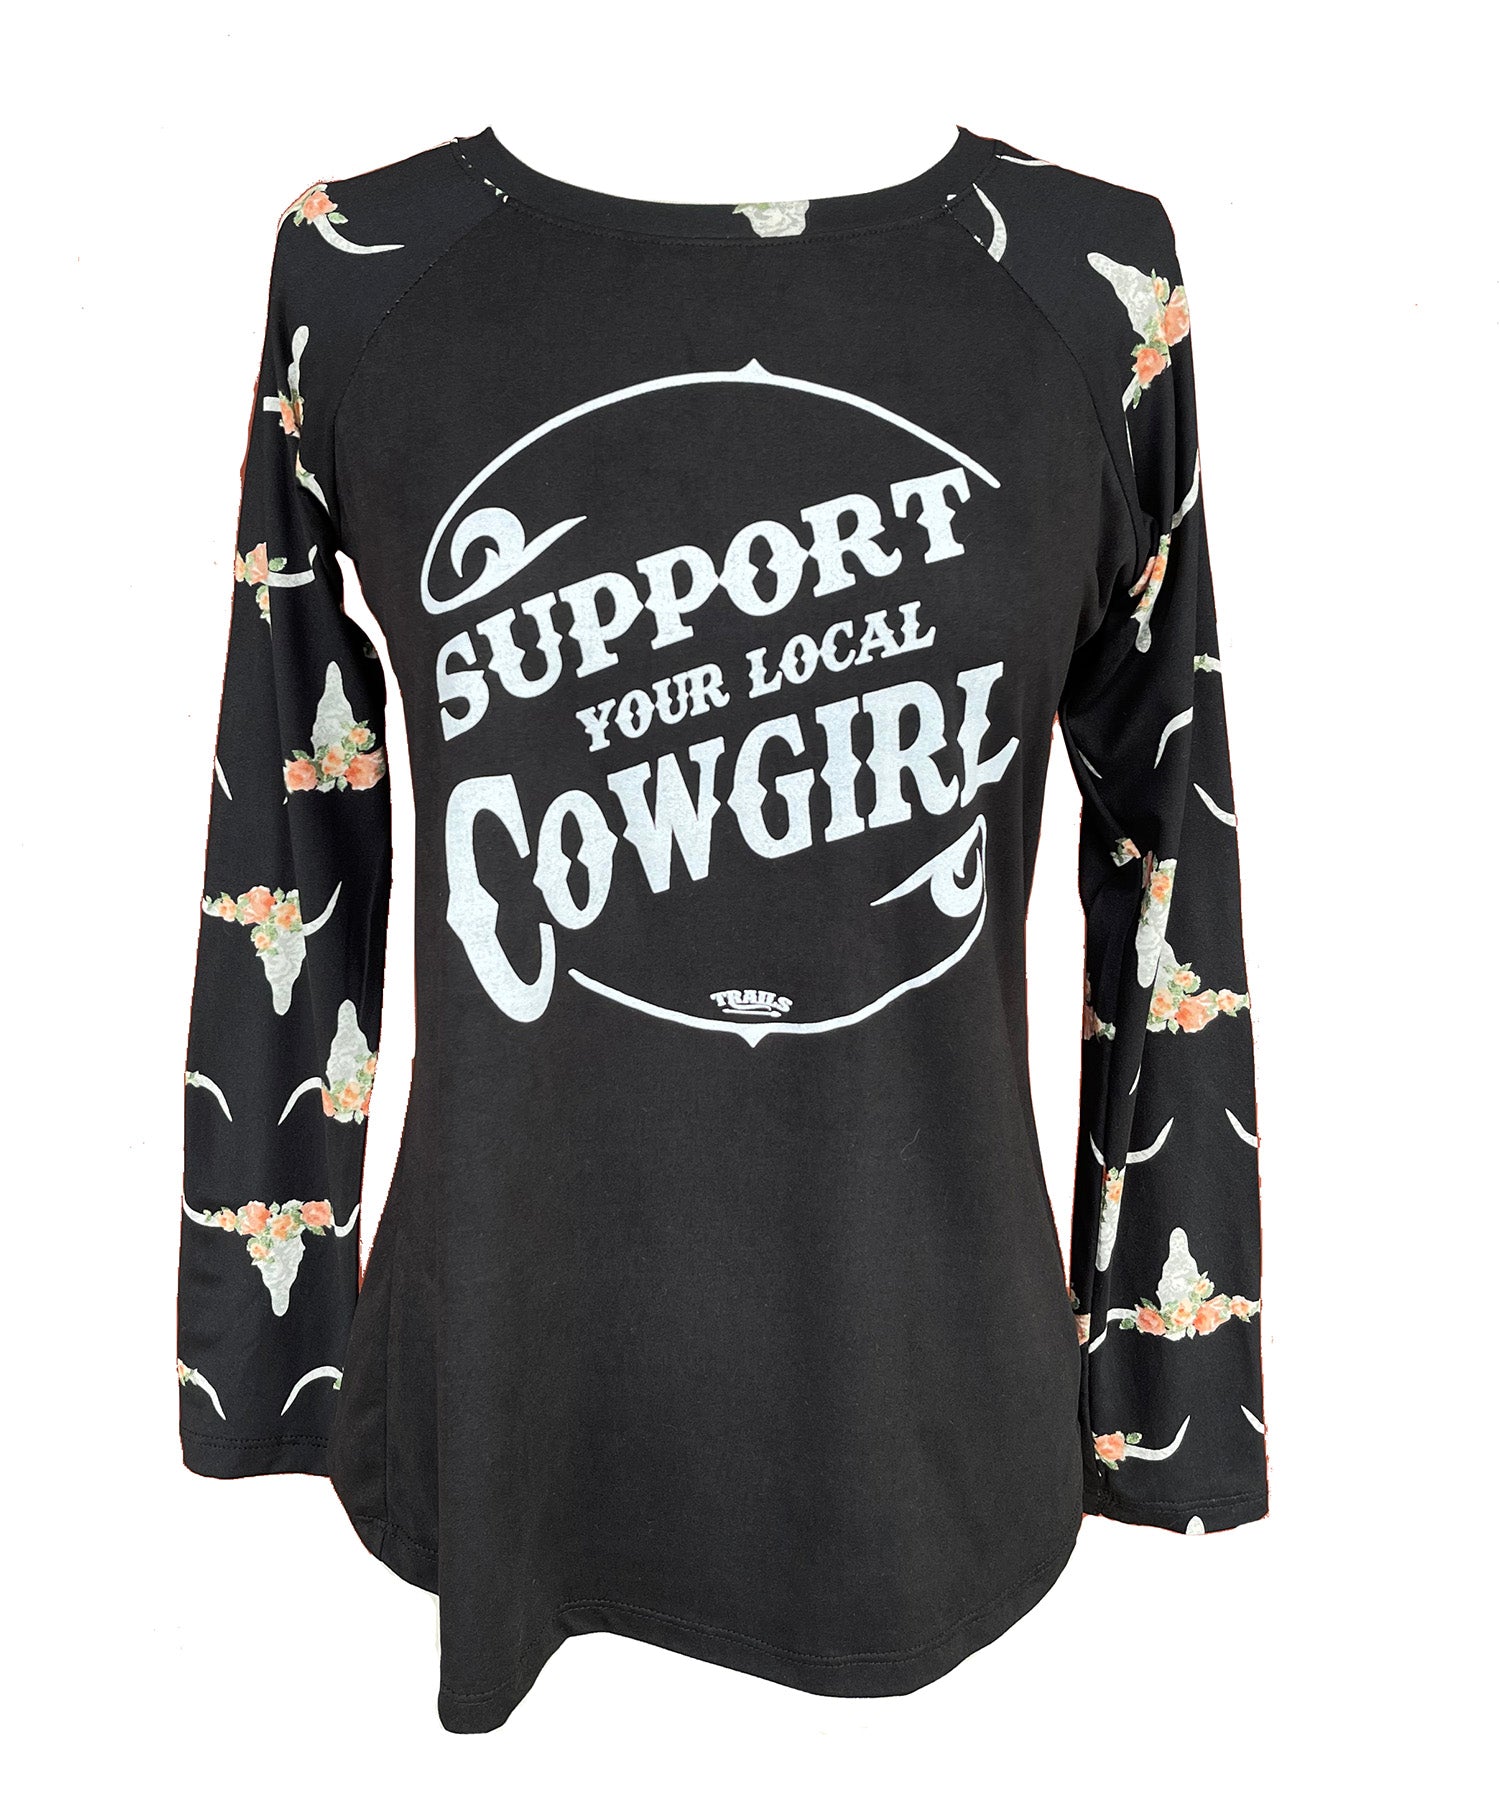 Support Your Local Cowgirl Raglan Shirt - ATTITUDE, bent, beth, bound, COUNTRY, COWGIRL, GIRL, hell, HOWDY, PLUS, rip, RODEO, SIZE, smooth, SUMMER, TANK, tennessee, TOP, TOPO, WESTERN, whiskey, yellowstone - Shirts & Tops - Baha Ranch Western Wear